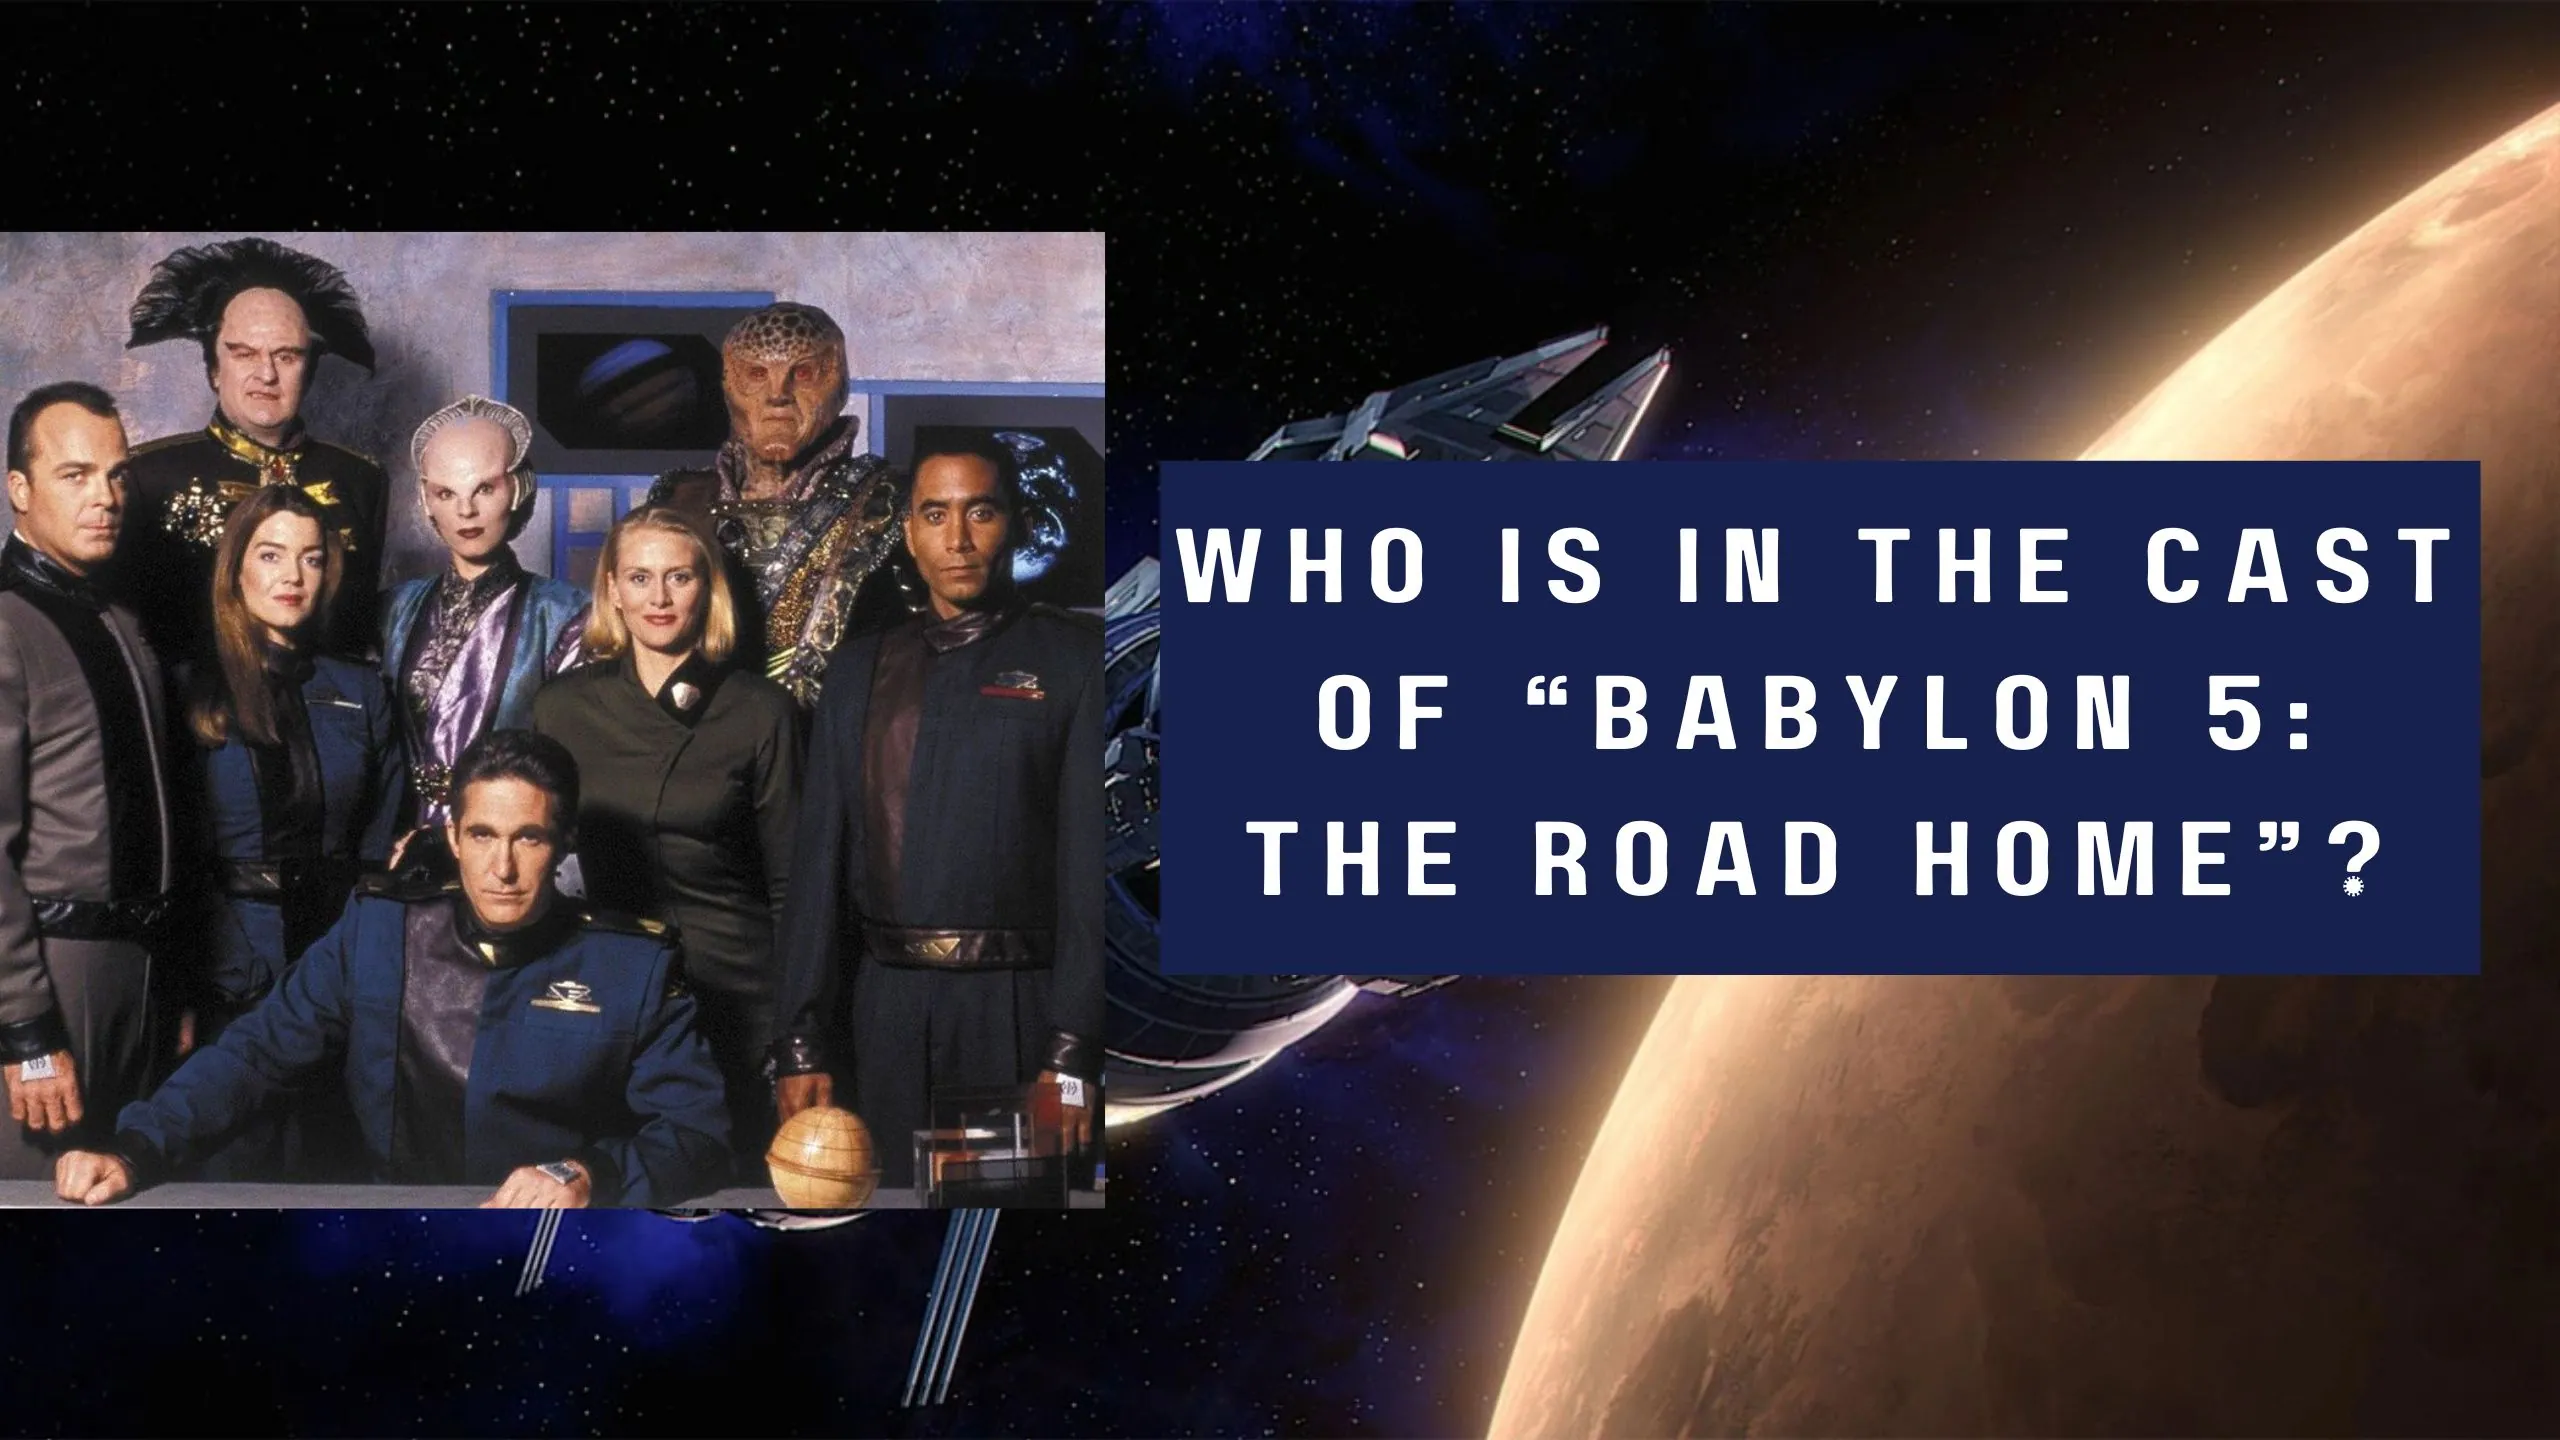 Discover Who is in the cast of “Babylon 5: The Road Home”